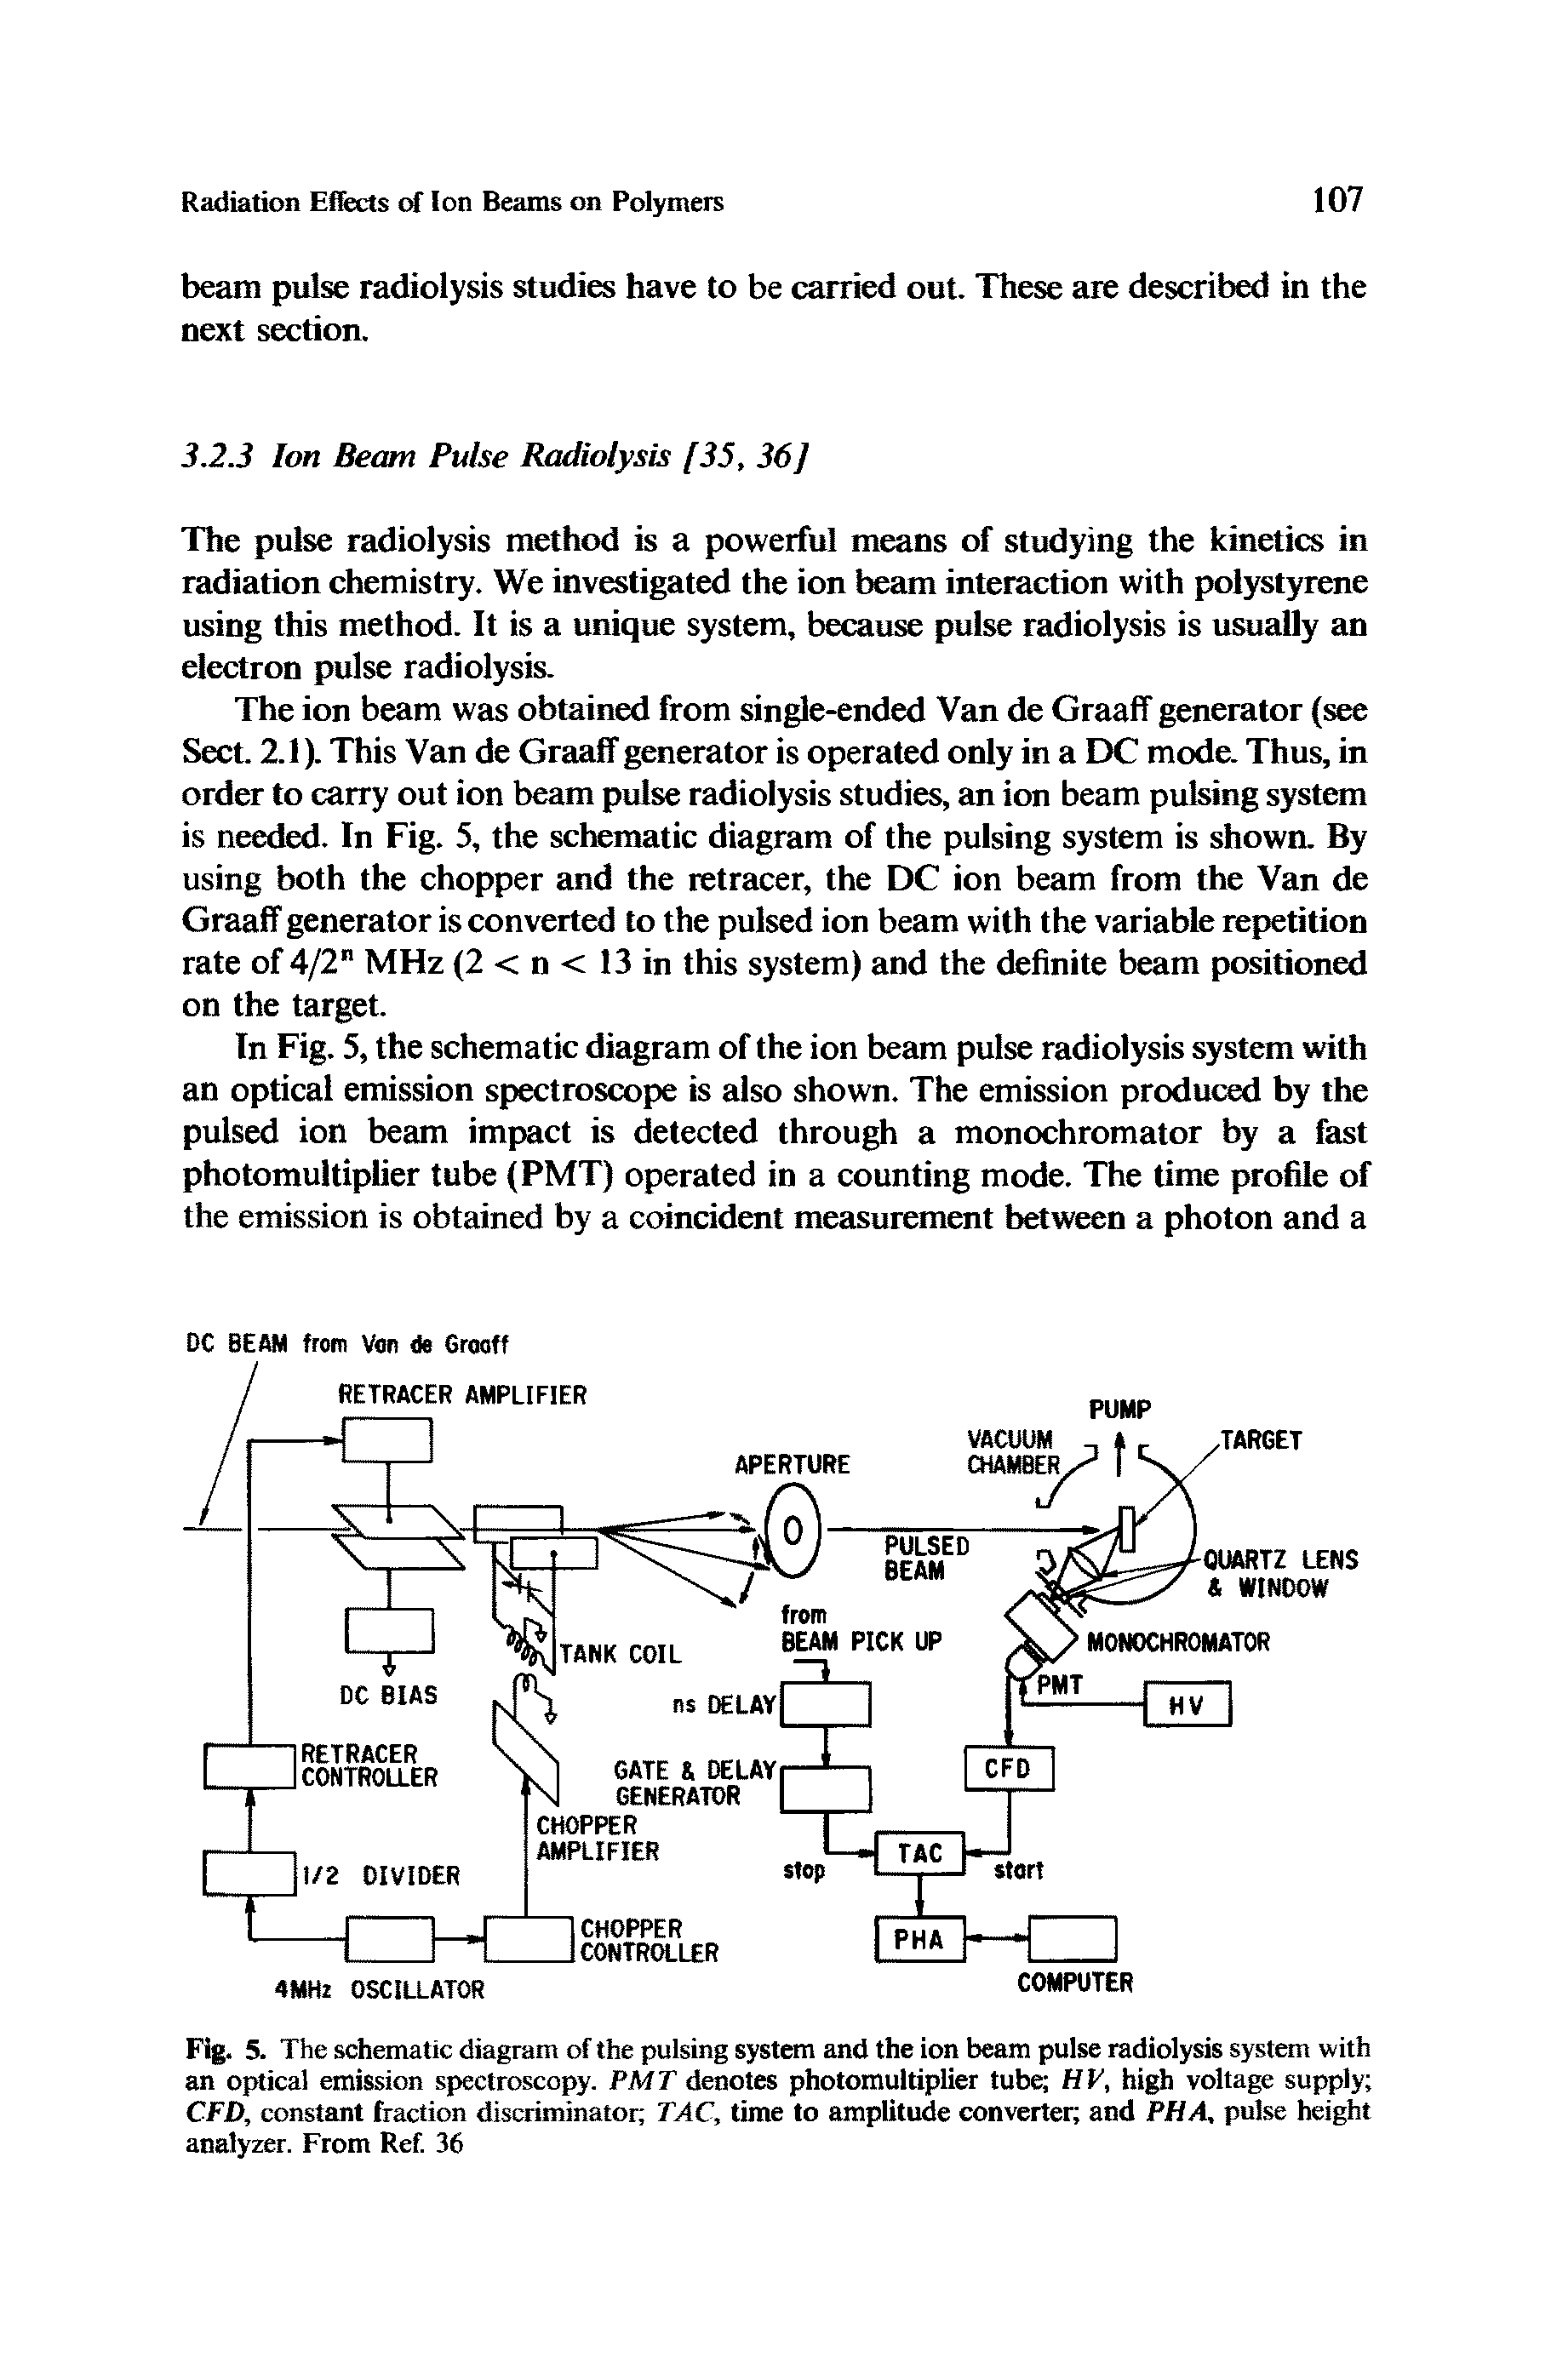 Fig. 5. The schematic diagram of the pulsing system and the ion beam pulse radiolysis system with an optical emission spectroscopy. PMT denotes photomultiplier tube HV, high voltage supply CFD, constant fraction discriminator TAC, time to amplitude converter and PH A, pulse height analyzer. From Ref. 36...